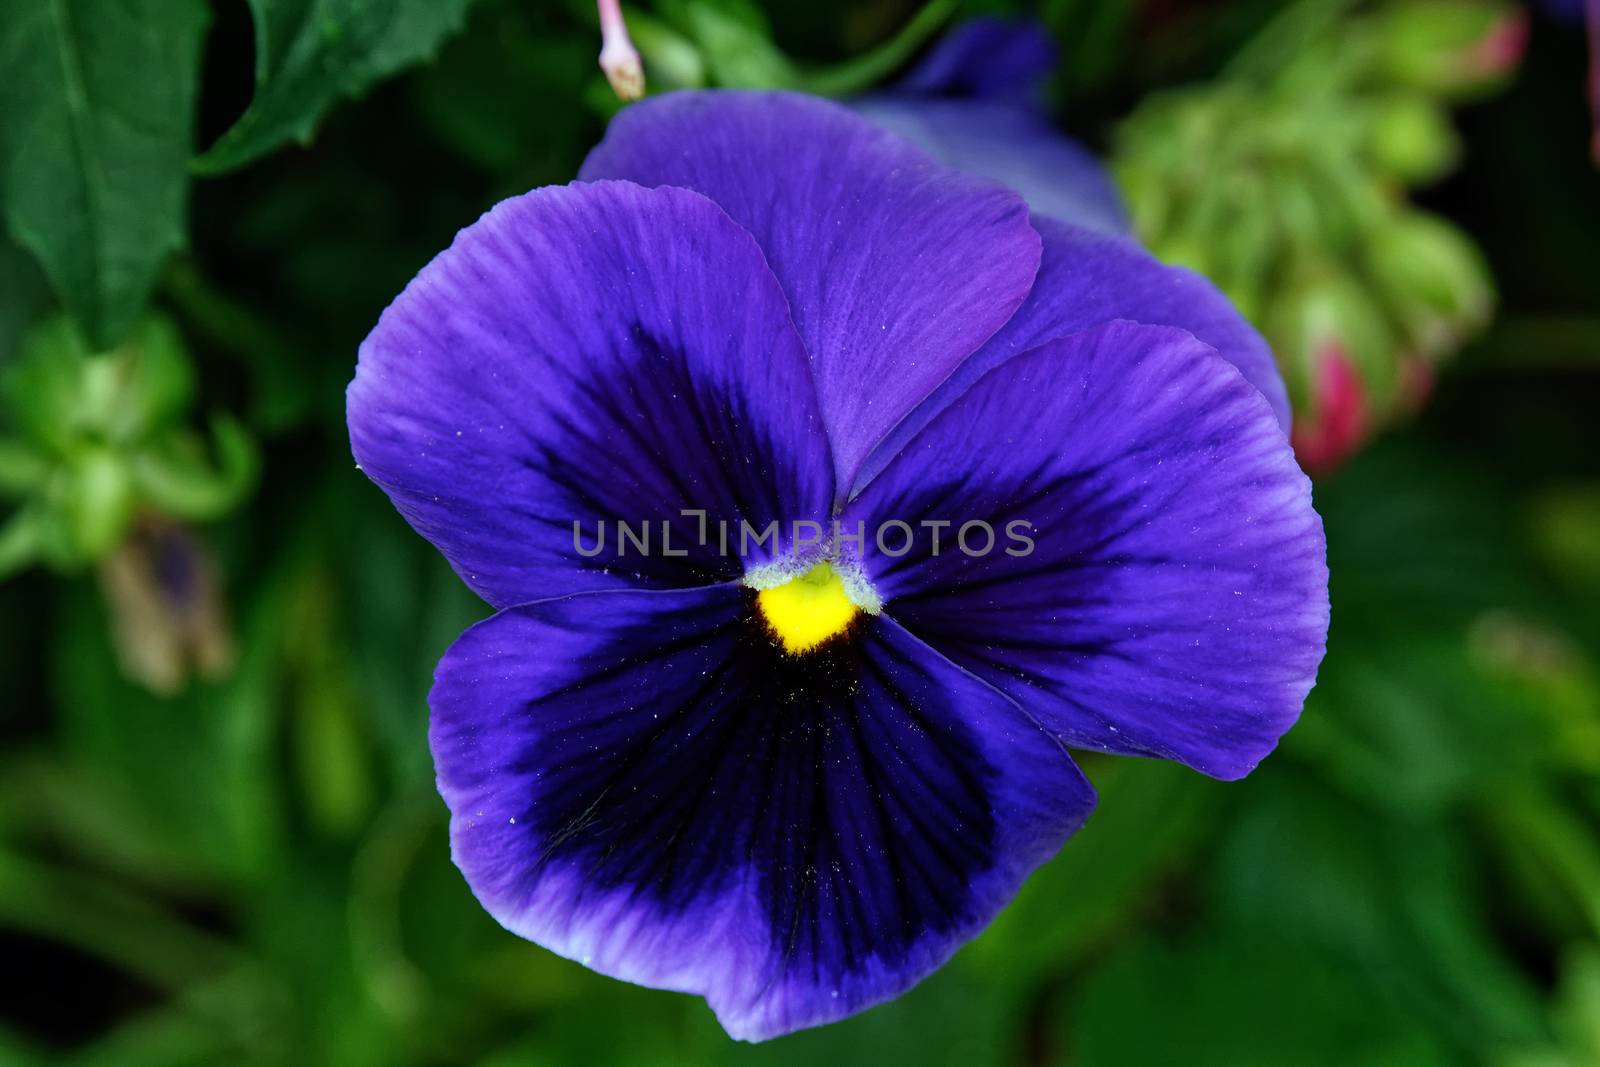 Nice violet blue blossom with yellow center.